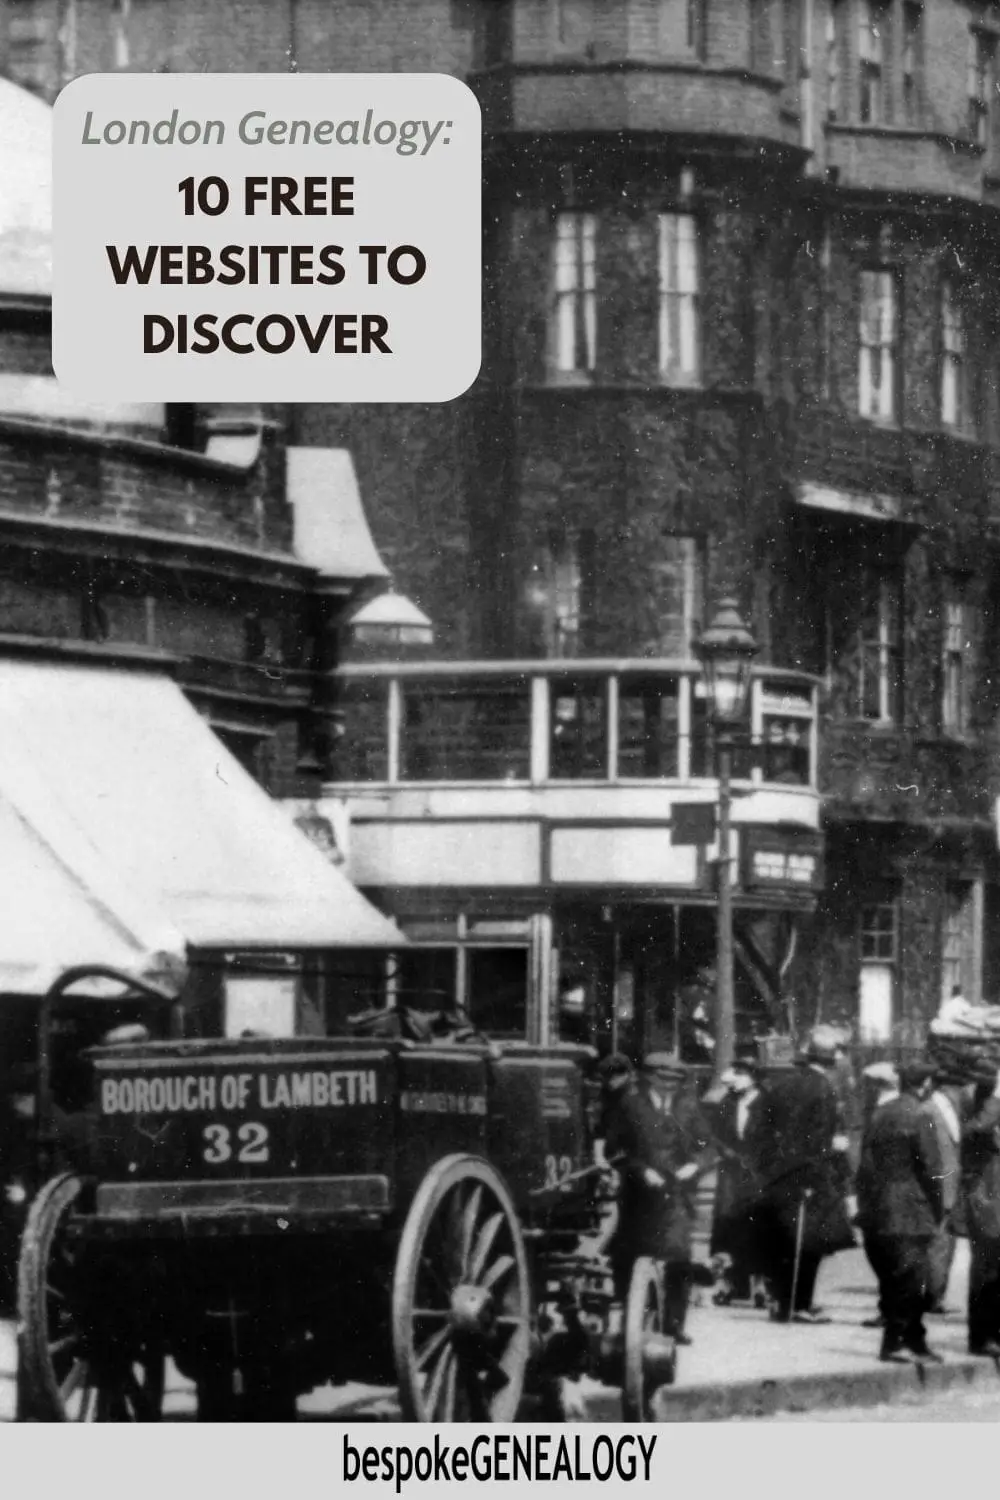 London genealogy: 10 free websites to discover. Edwardian photo of a street scene in the Borough of Lambeth, London.